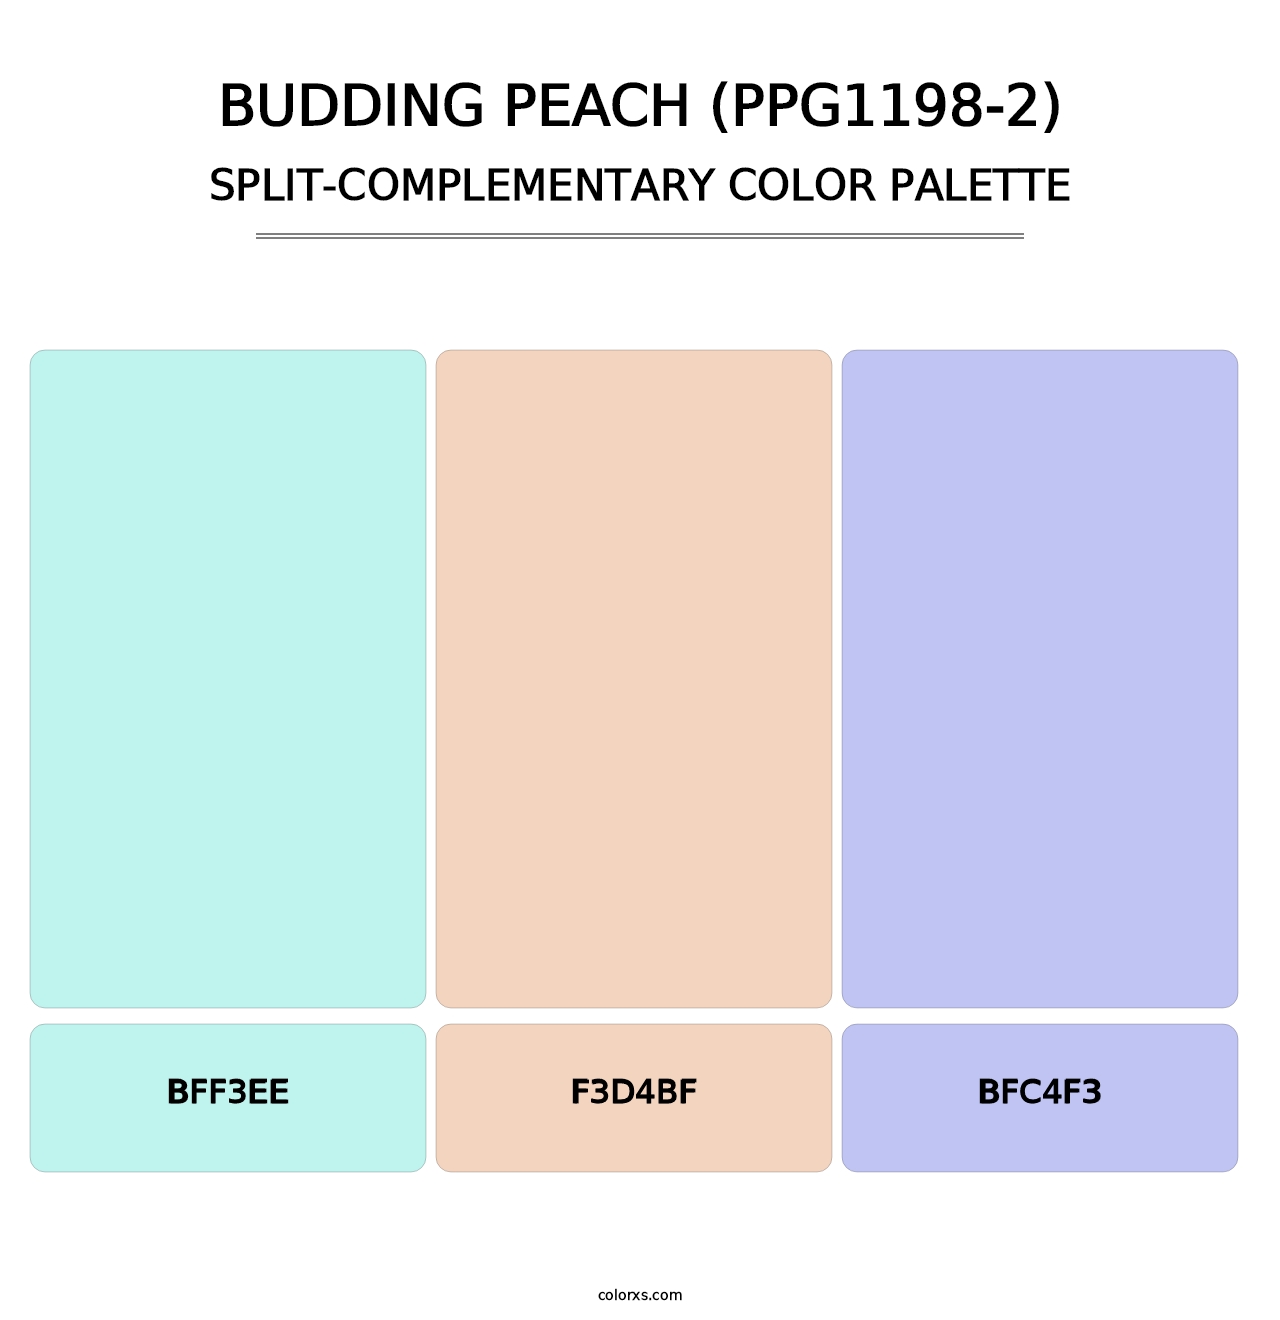 Budding Peach (PPG1198-2) - Split-Complementary Color Palette